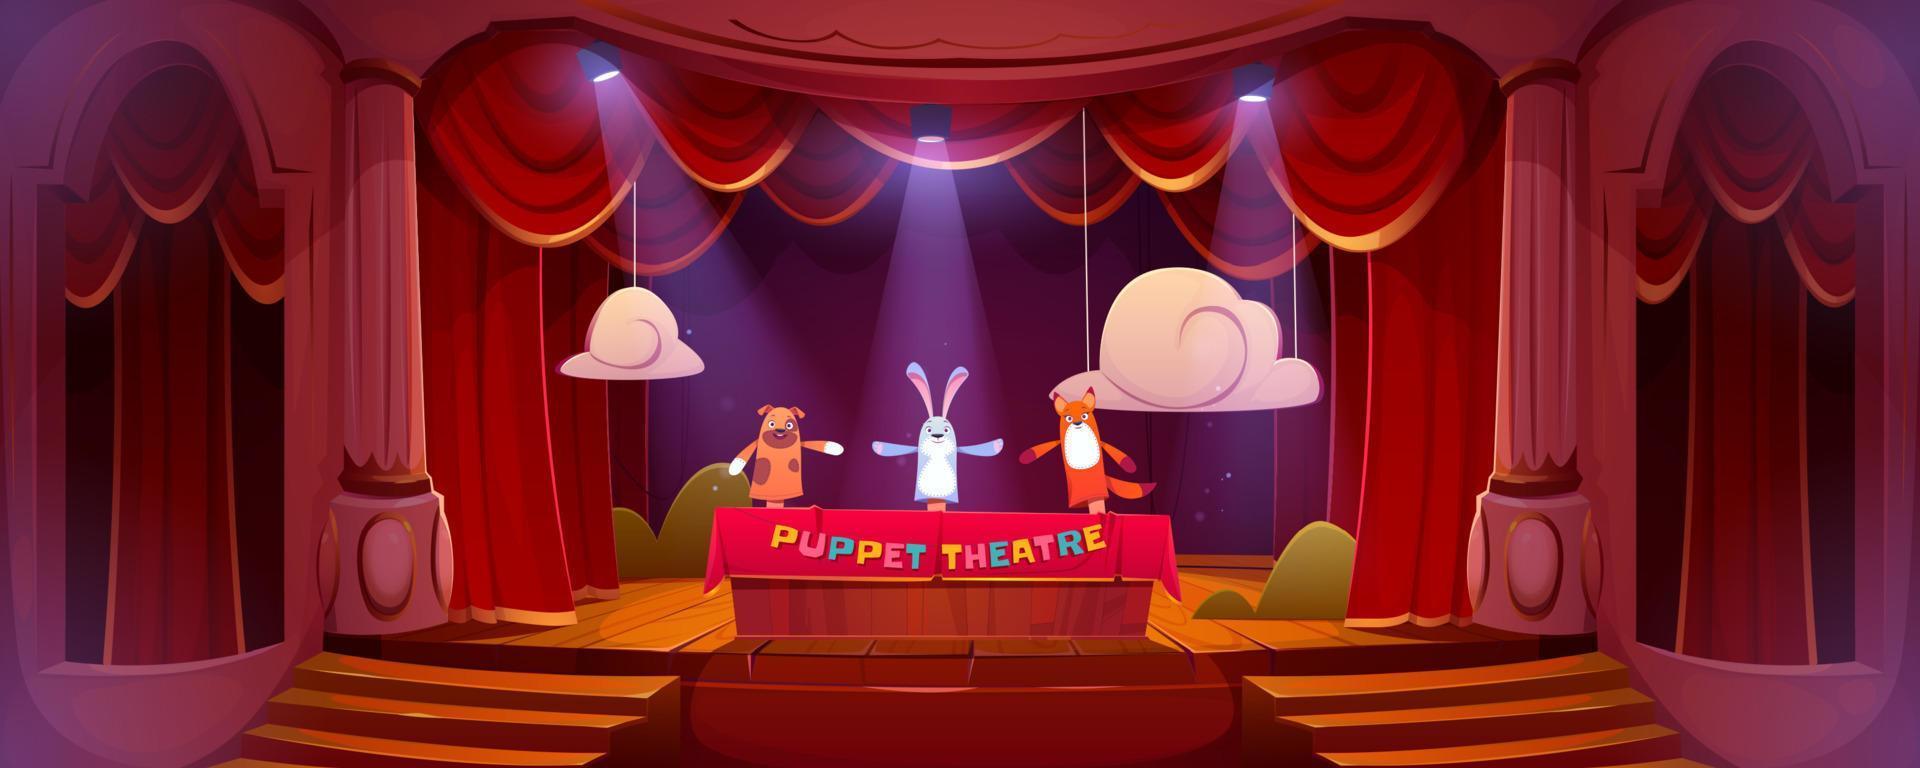 Puppet theater on stage, funny dolls perform show vector